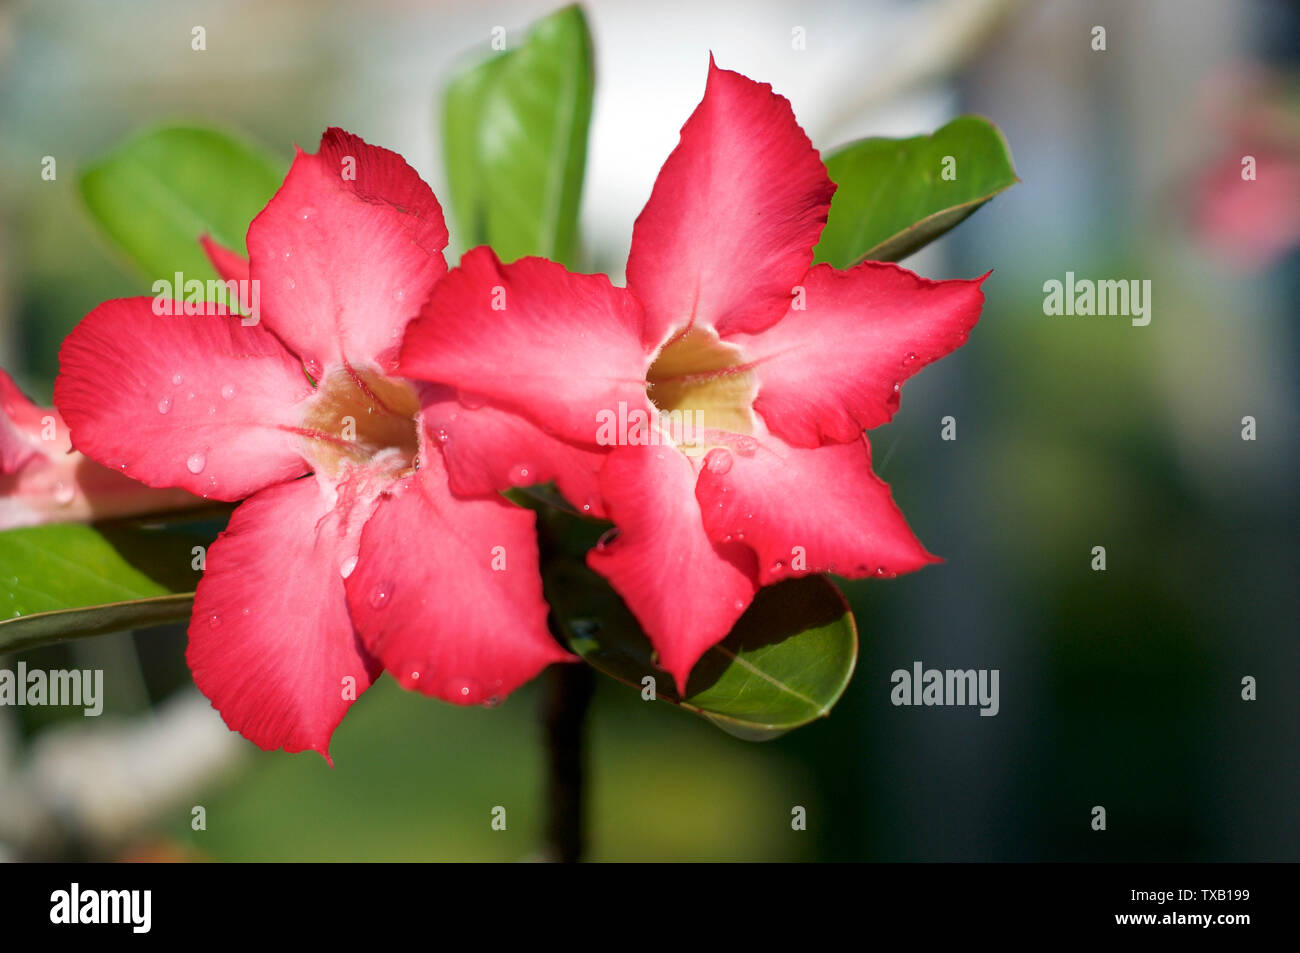 Close up picture of some beautiful desert rose flower (Also called Impala Lily, Mock Azalea, Pink adenium) with blurred background Stock Photo